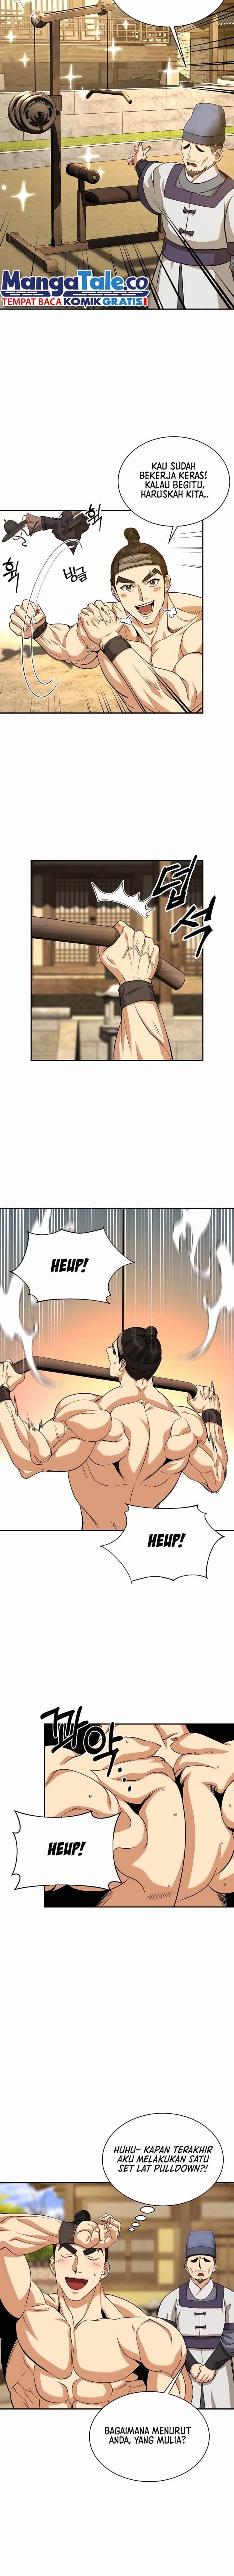 Muscle Joseon Chapter 14